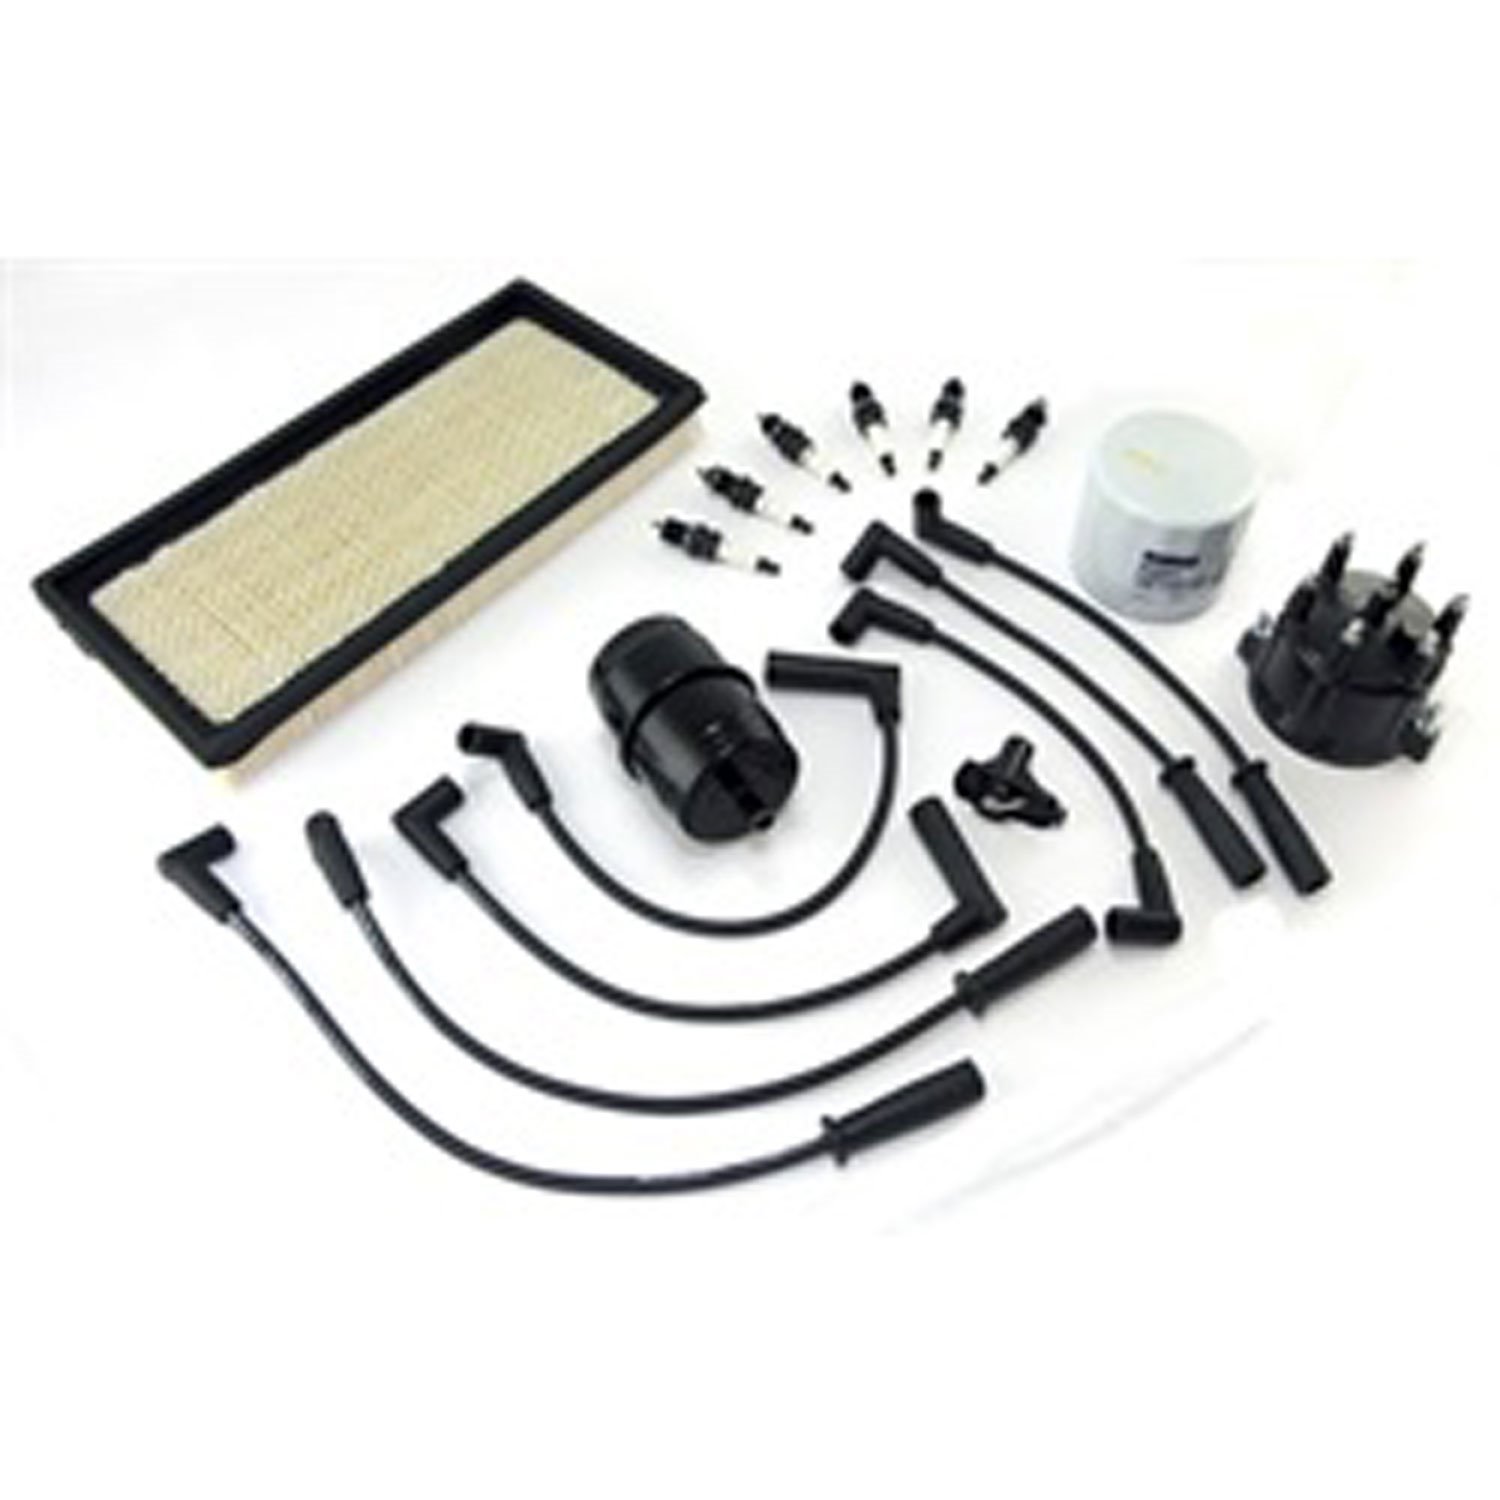 Ignition Tune Up Kit for 4.0L 1999-2000 Jeep